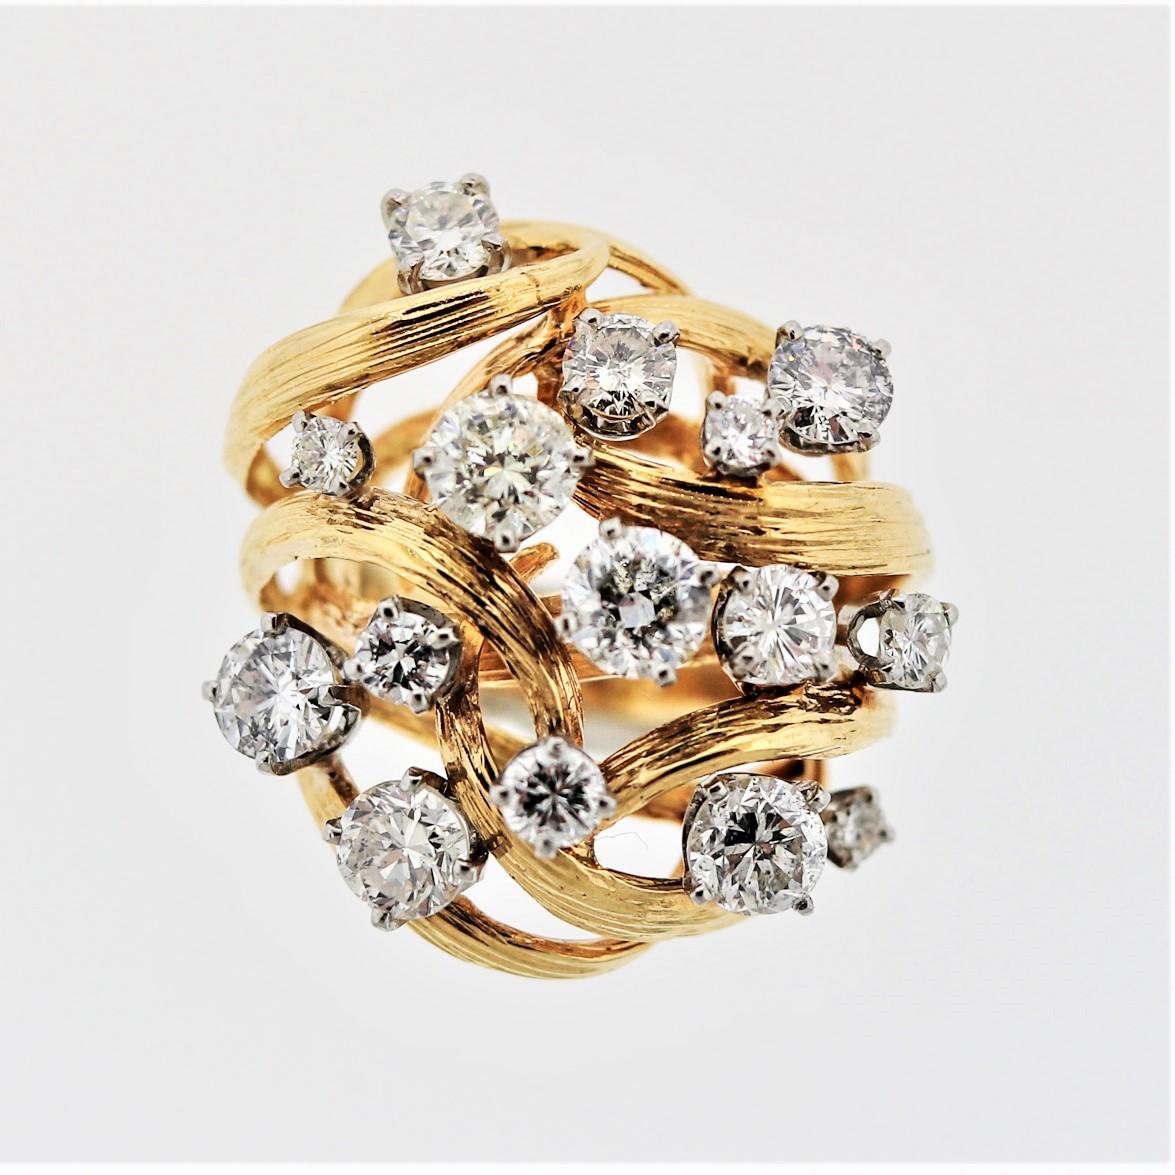 A bold and creative cocktail ring featuring a cluster of 15 large round brilliant-cut diamonds. They are set on twisting branches of yellow gold which have been hand-carved and textured. The diamonds in total weigh approximately 5 carats. Made in